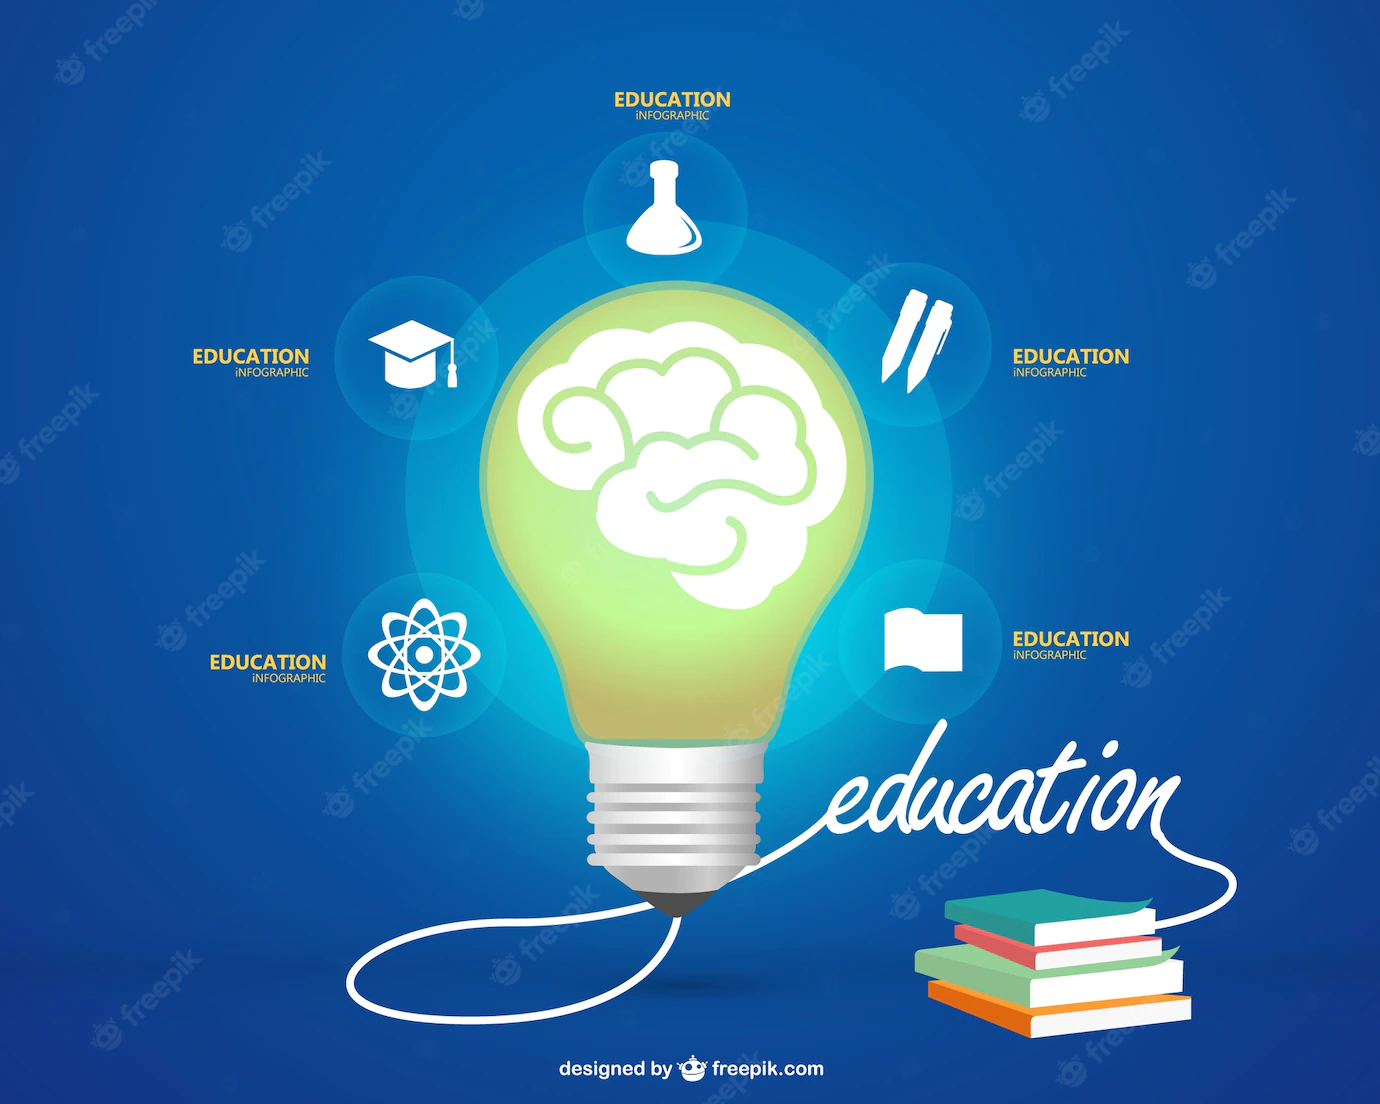 Education Infographic With Light Bulb 23 2147490416